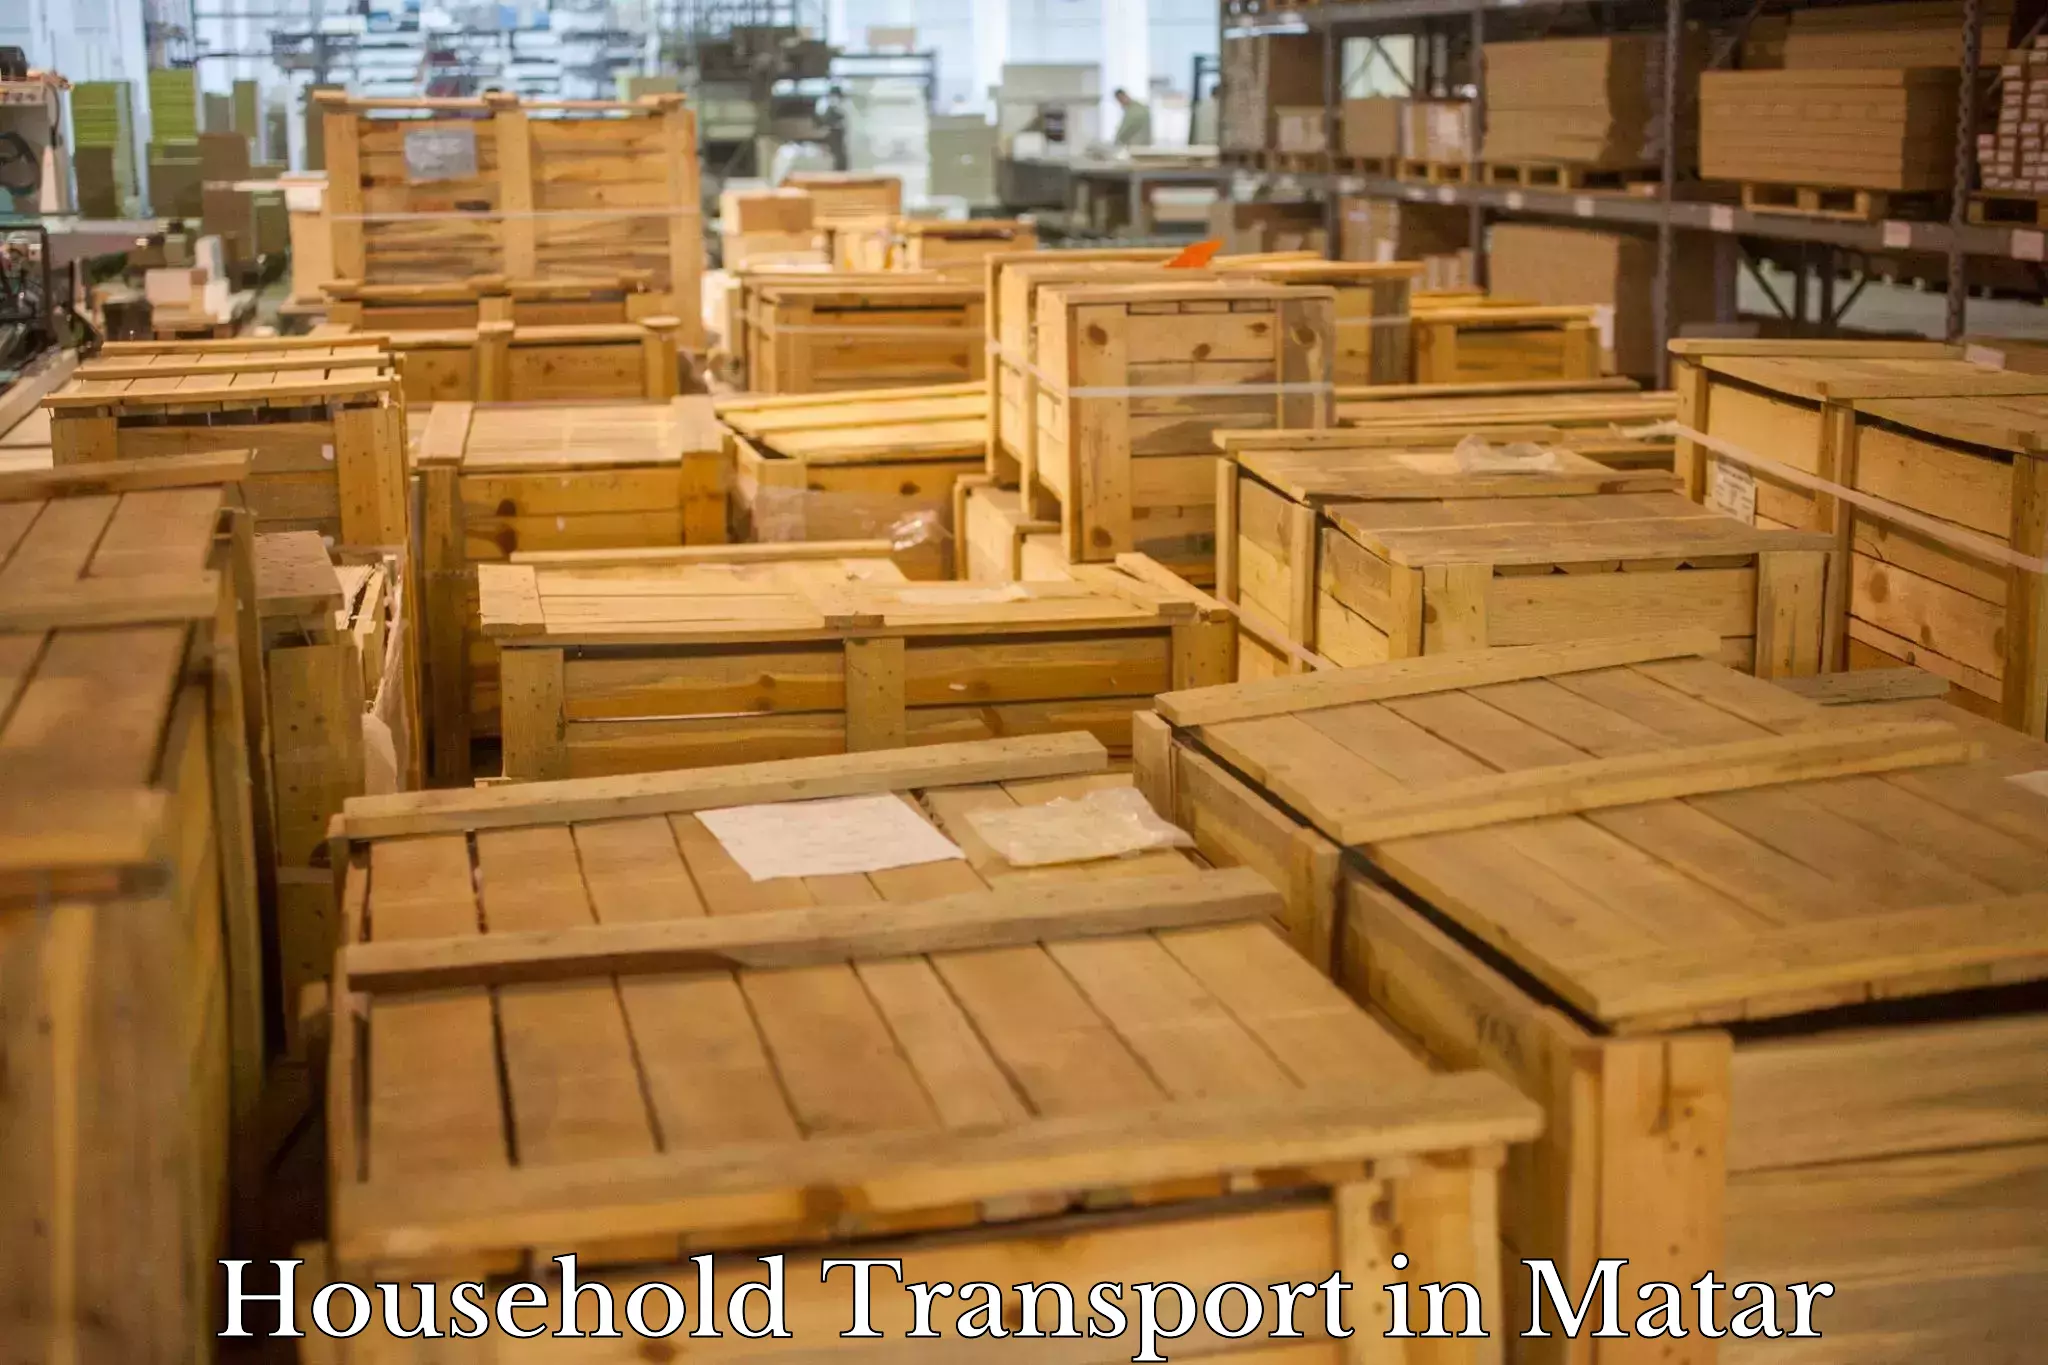 Furniture transport and storage in Matar